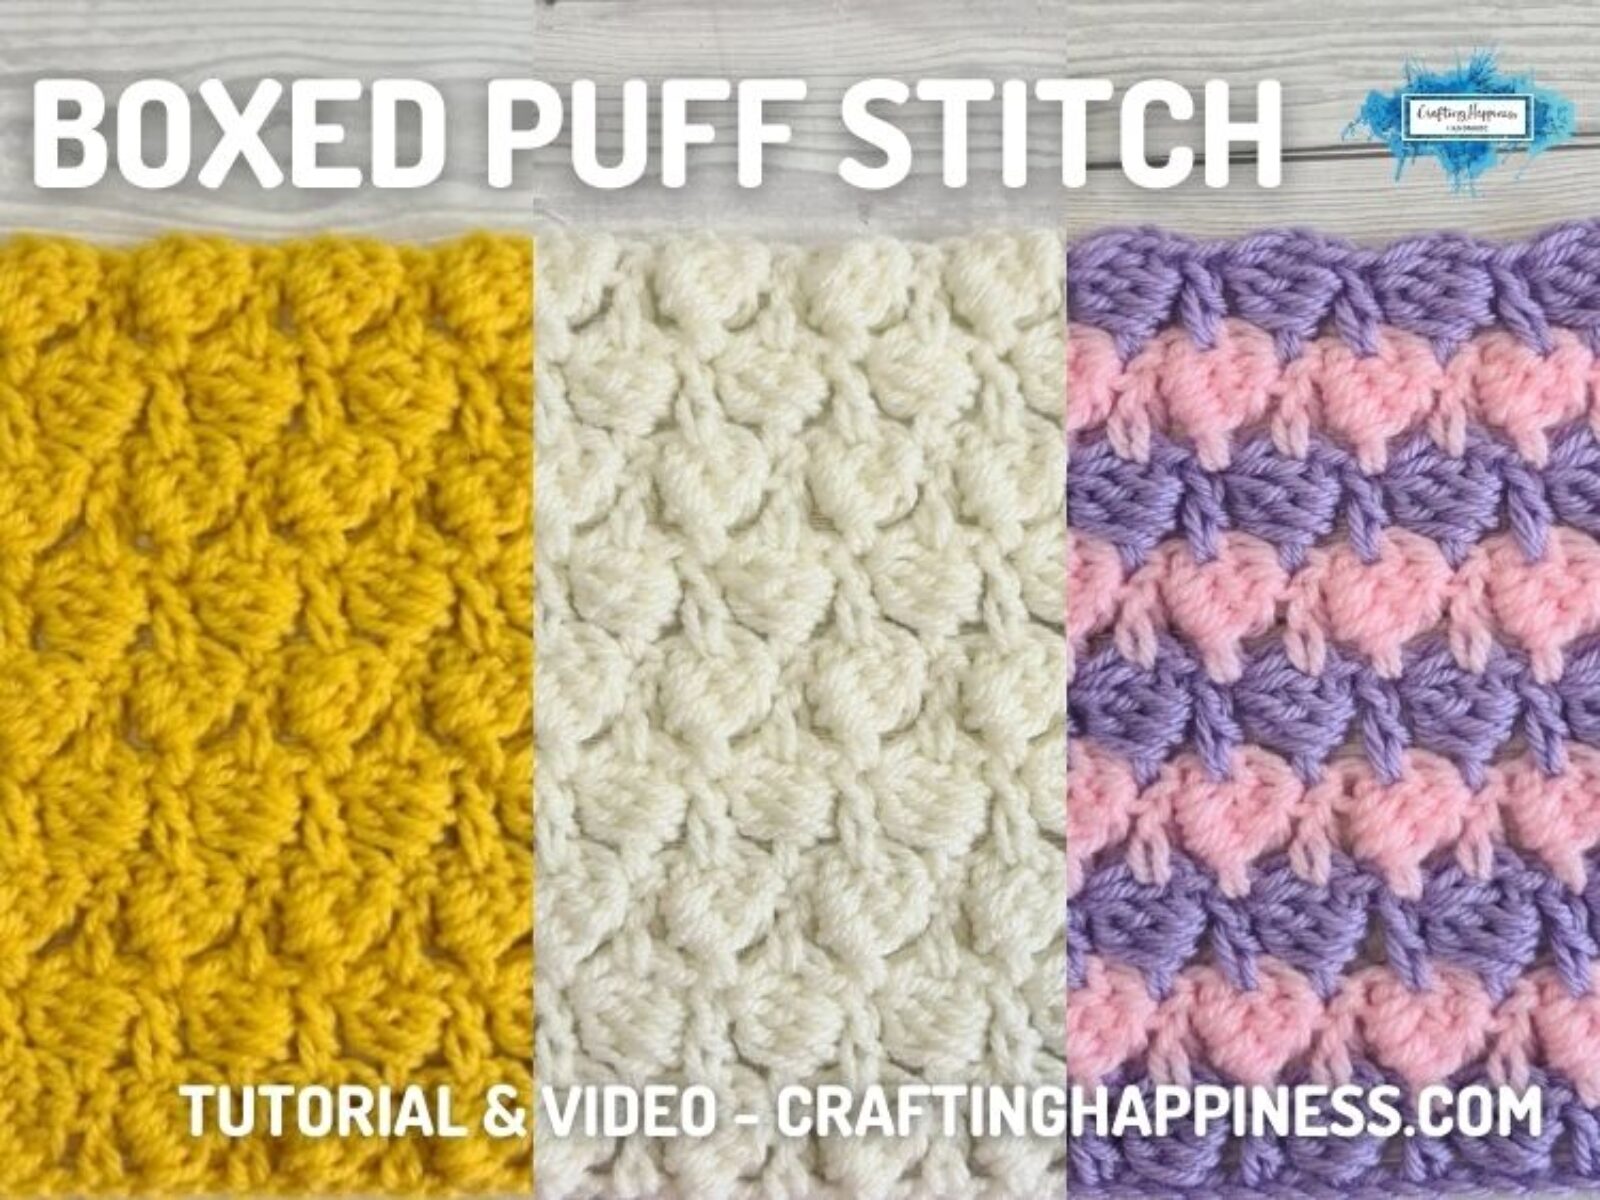 FB BLOG POSTER 2 - Boxed Puff Stitch Crafting Happiness